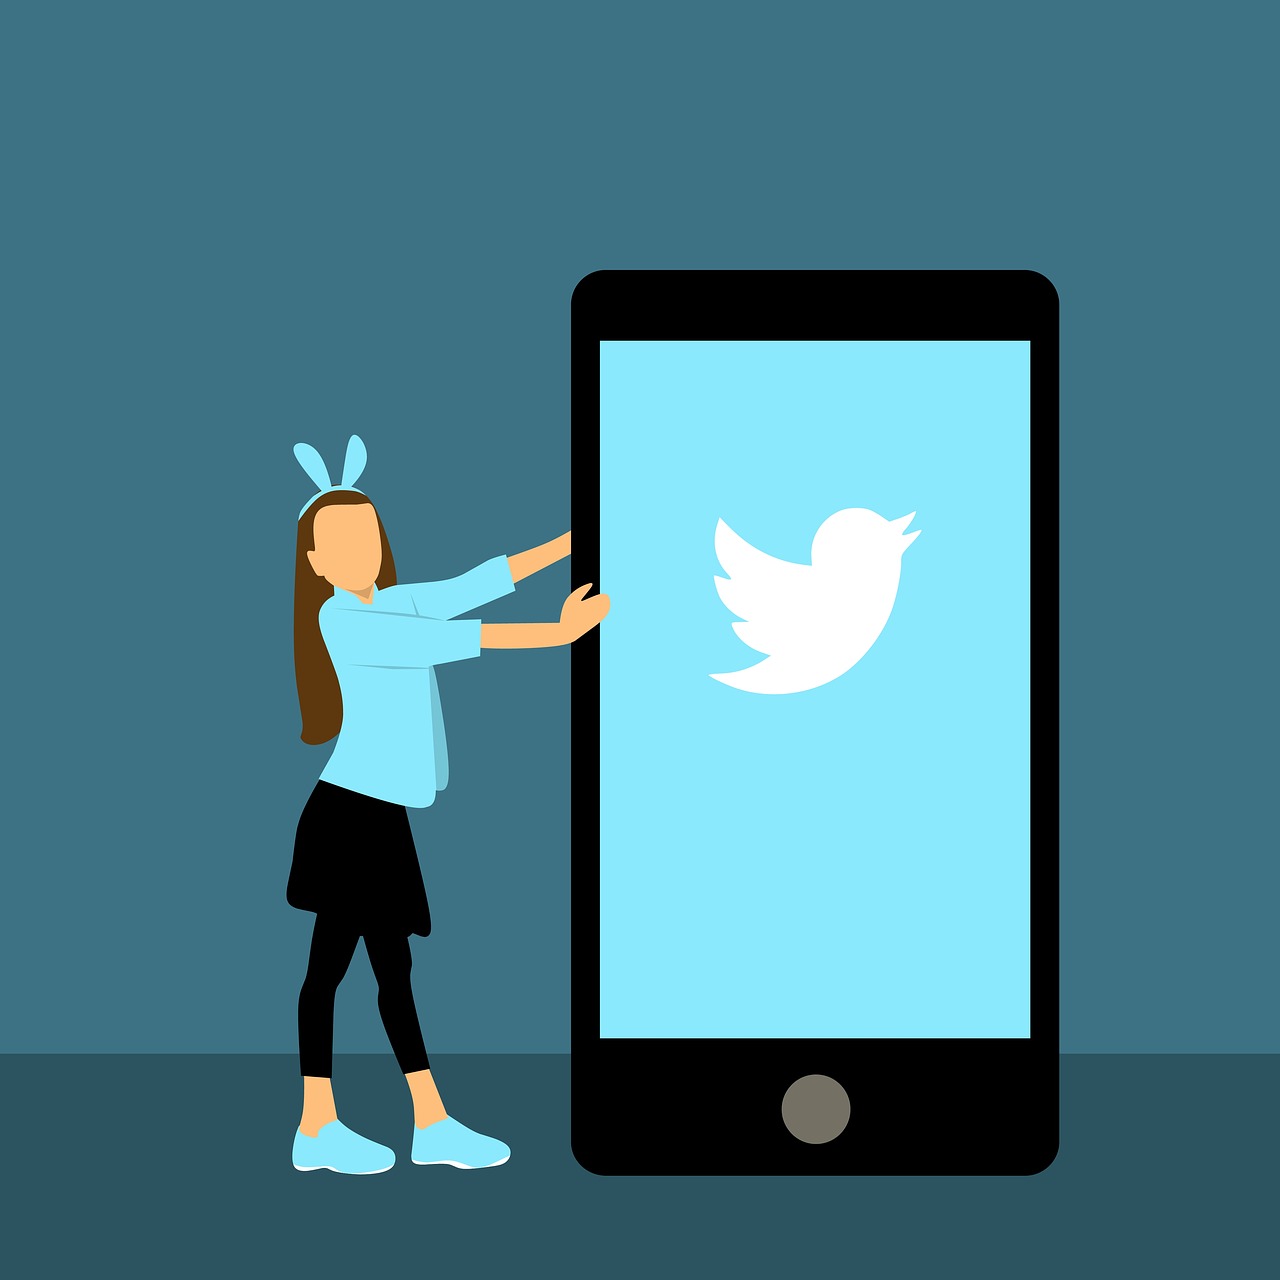 a woman standing next to a phone with a twitter logo on it, a cartoon, by Paul Bird, trending on pixabay, happening, wikihow illustration, minimalistic illustration, stock photo